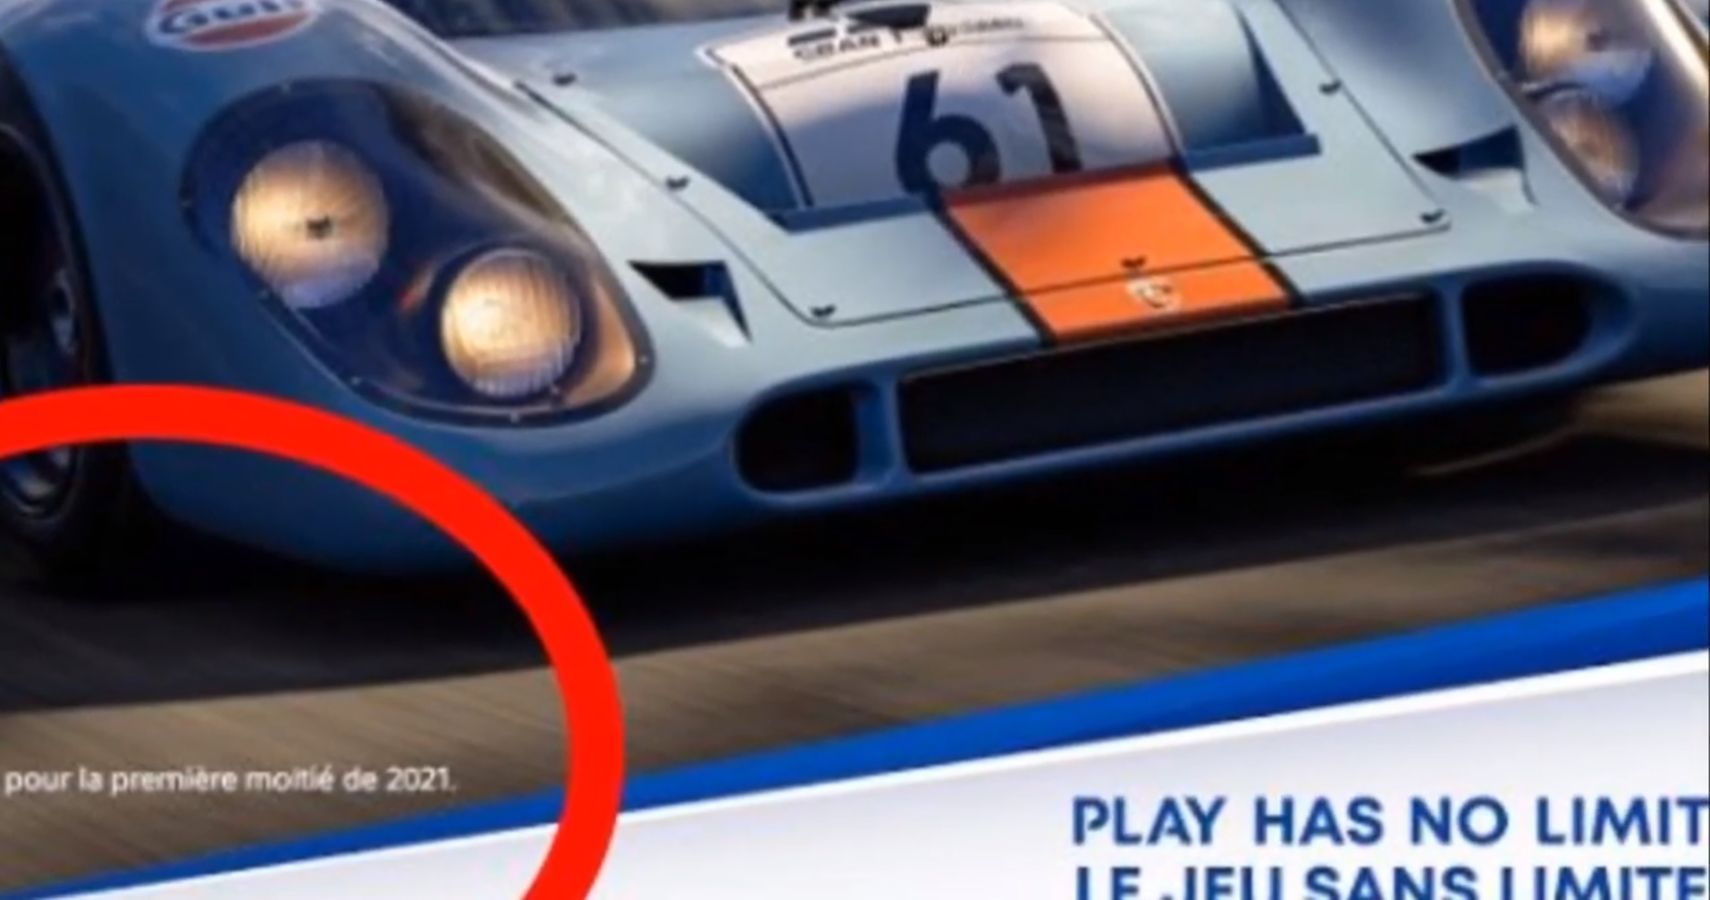 Gran Turismo 7 Releasing in “First Half of 2021”, According to